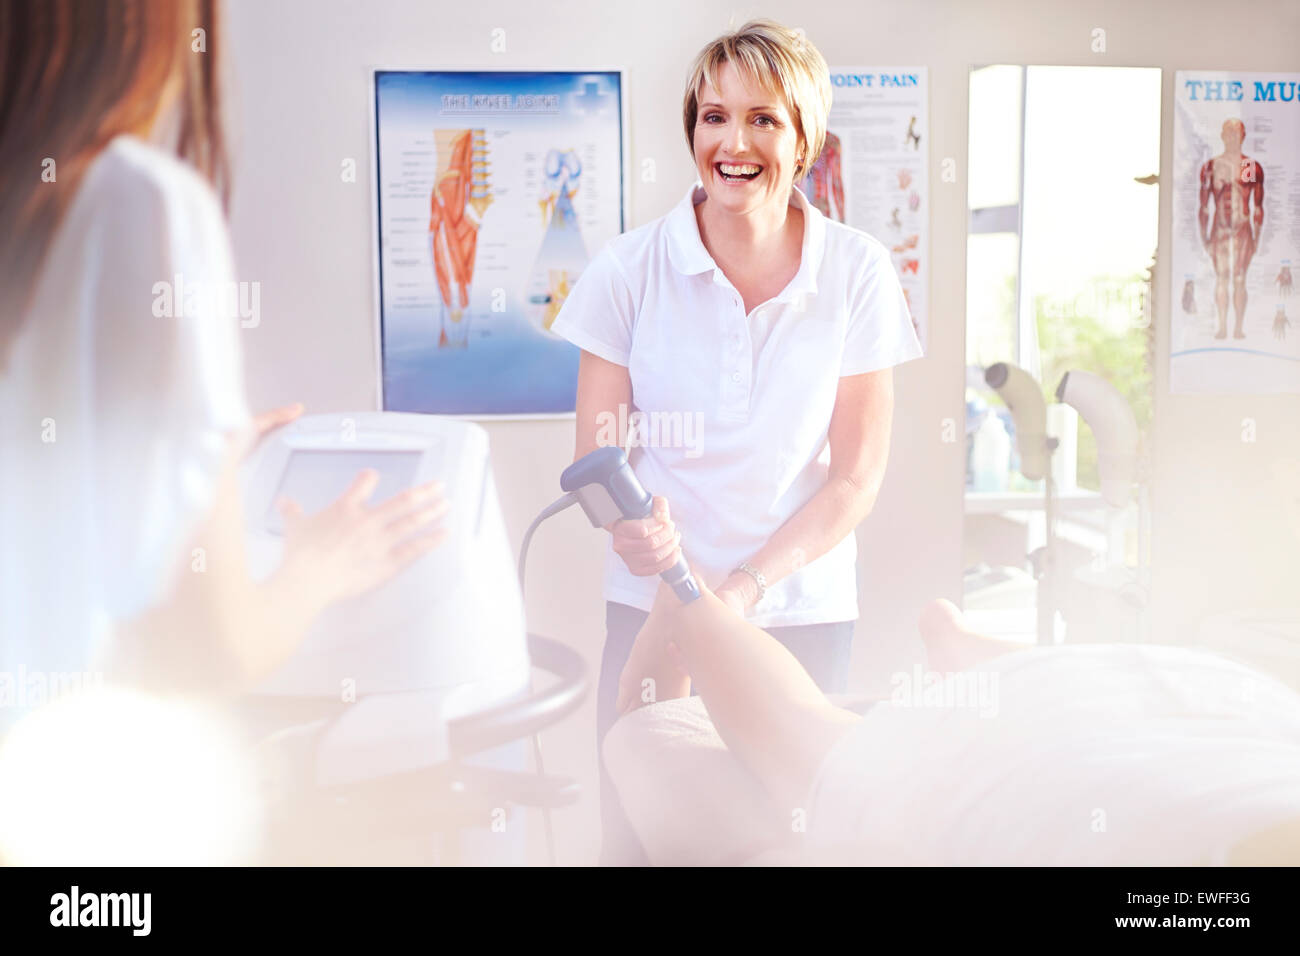 Smiling physical therapist using ultrasound probe on patient’s leg Stock Photo